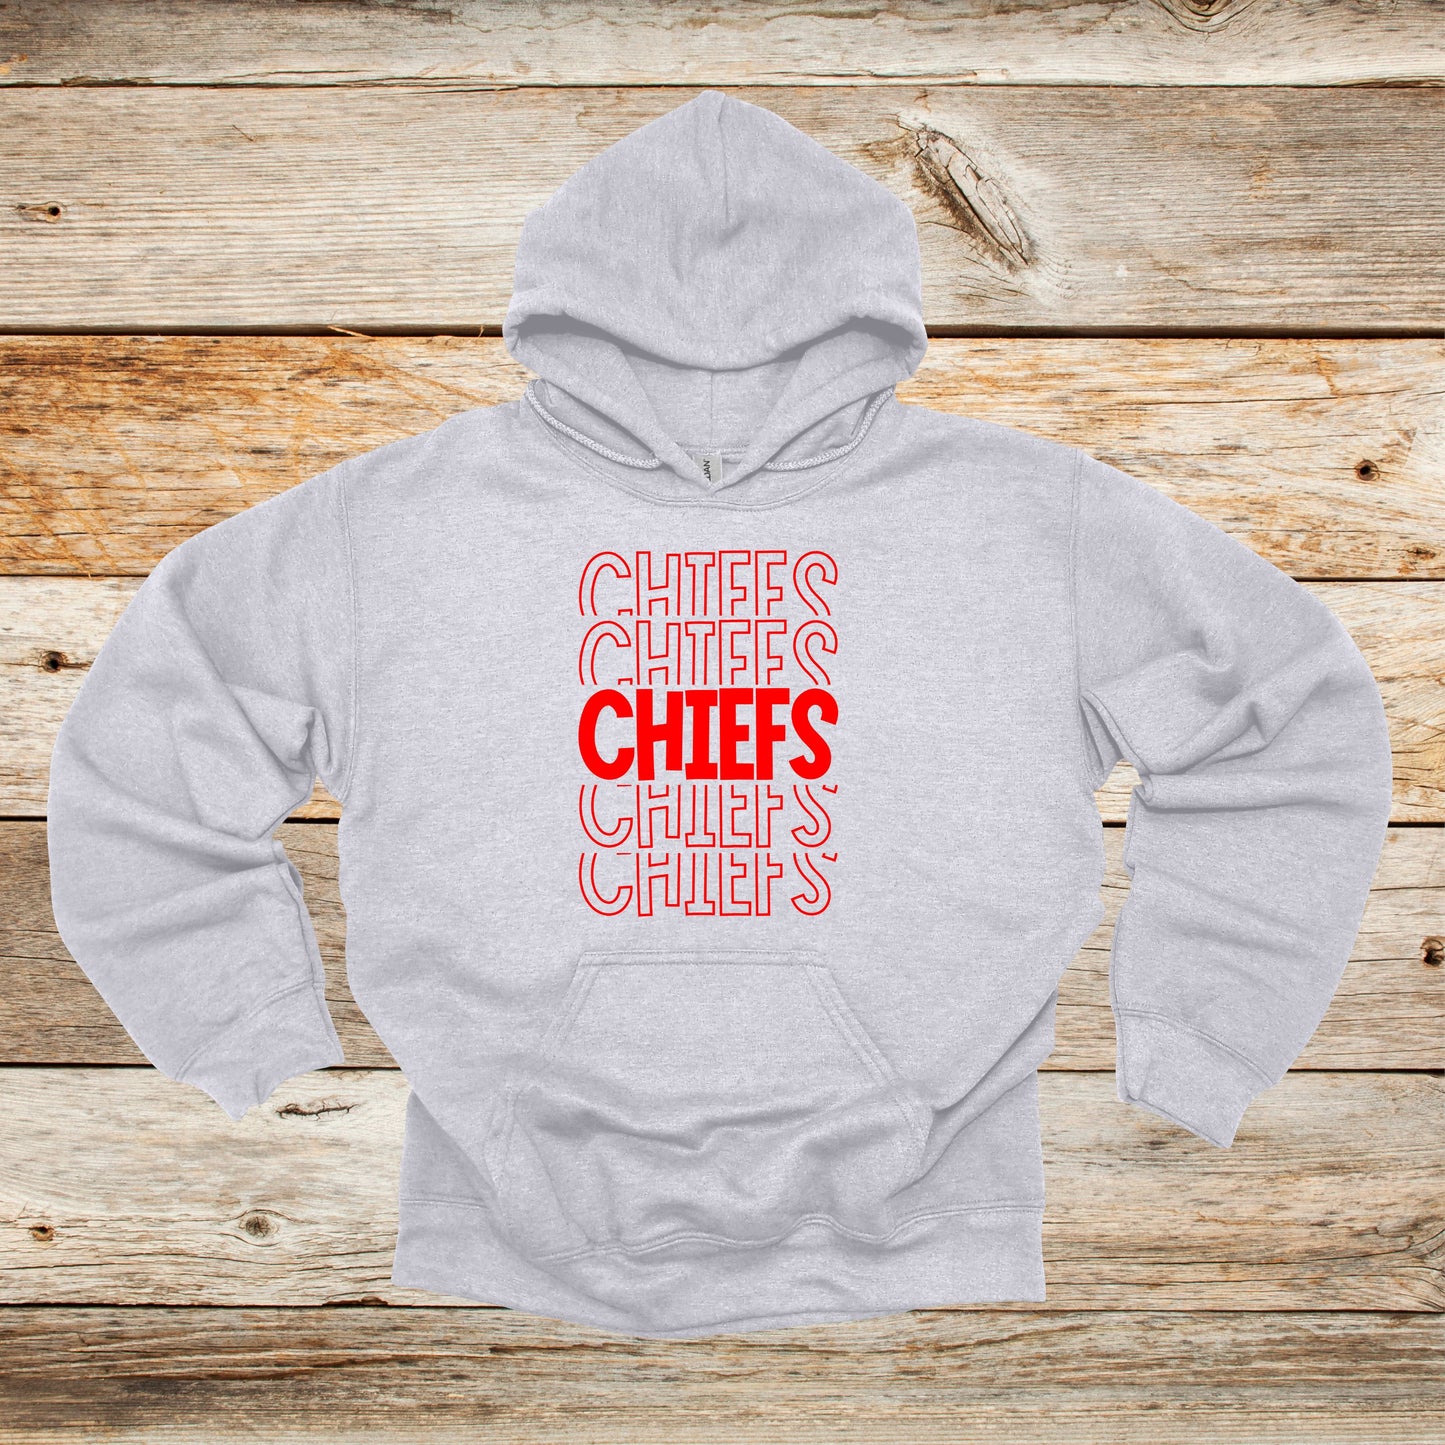 Football Crewneck and Hooded Sweatshirt - Chiefs Football - Chiefs - Adult and Children's Tee Shirts - Sports Hooded Sweatshirt Graphic Avenue Hooded Sweatshirt Sport Grey Adult Small